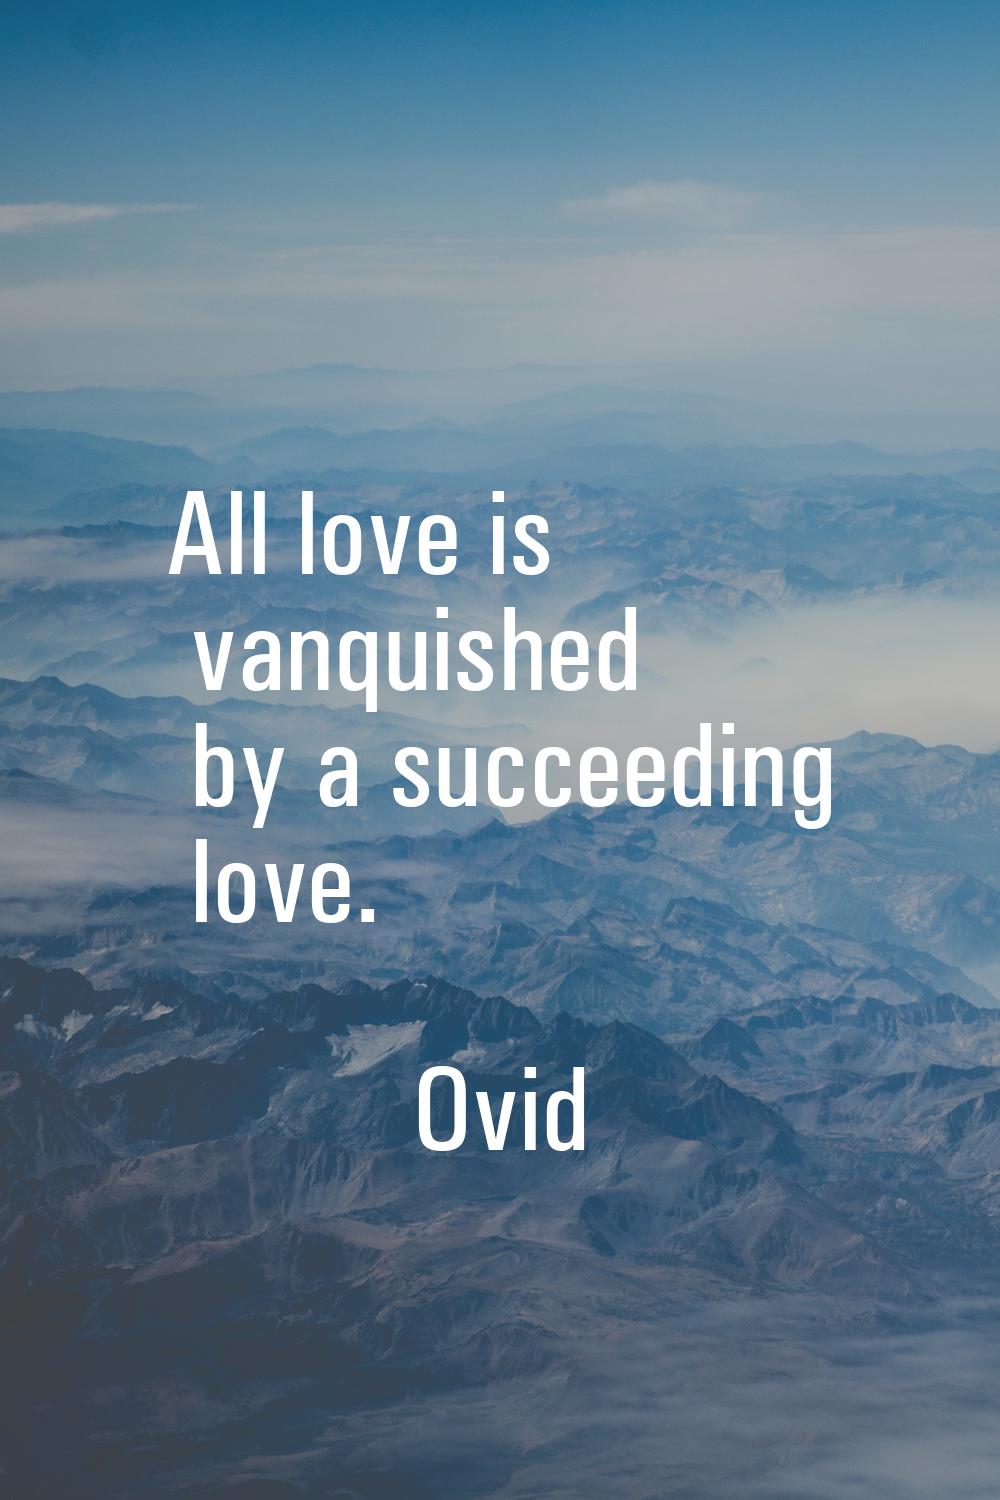 All love is vanquished by a succeeding love.